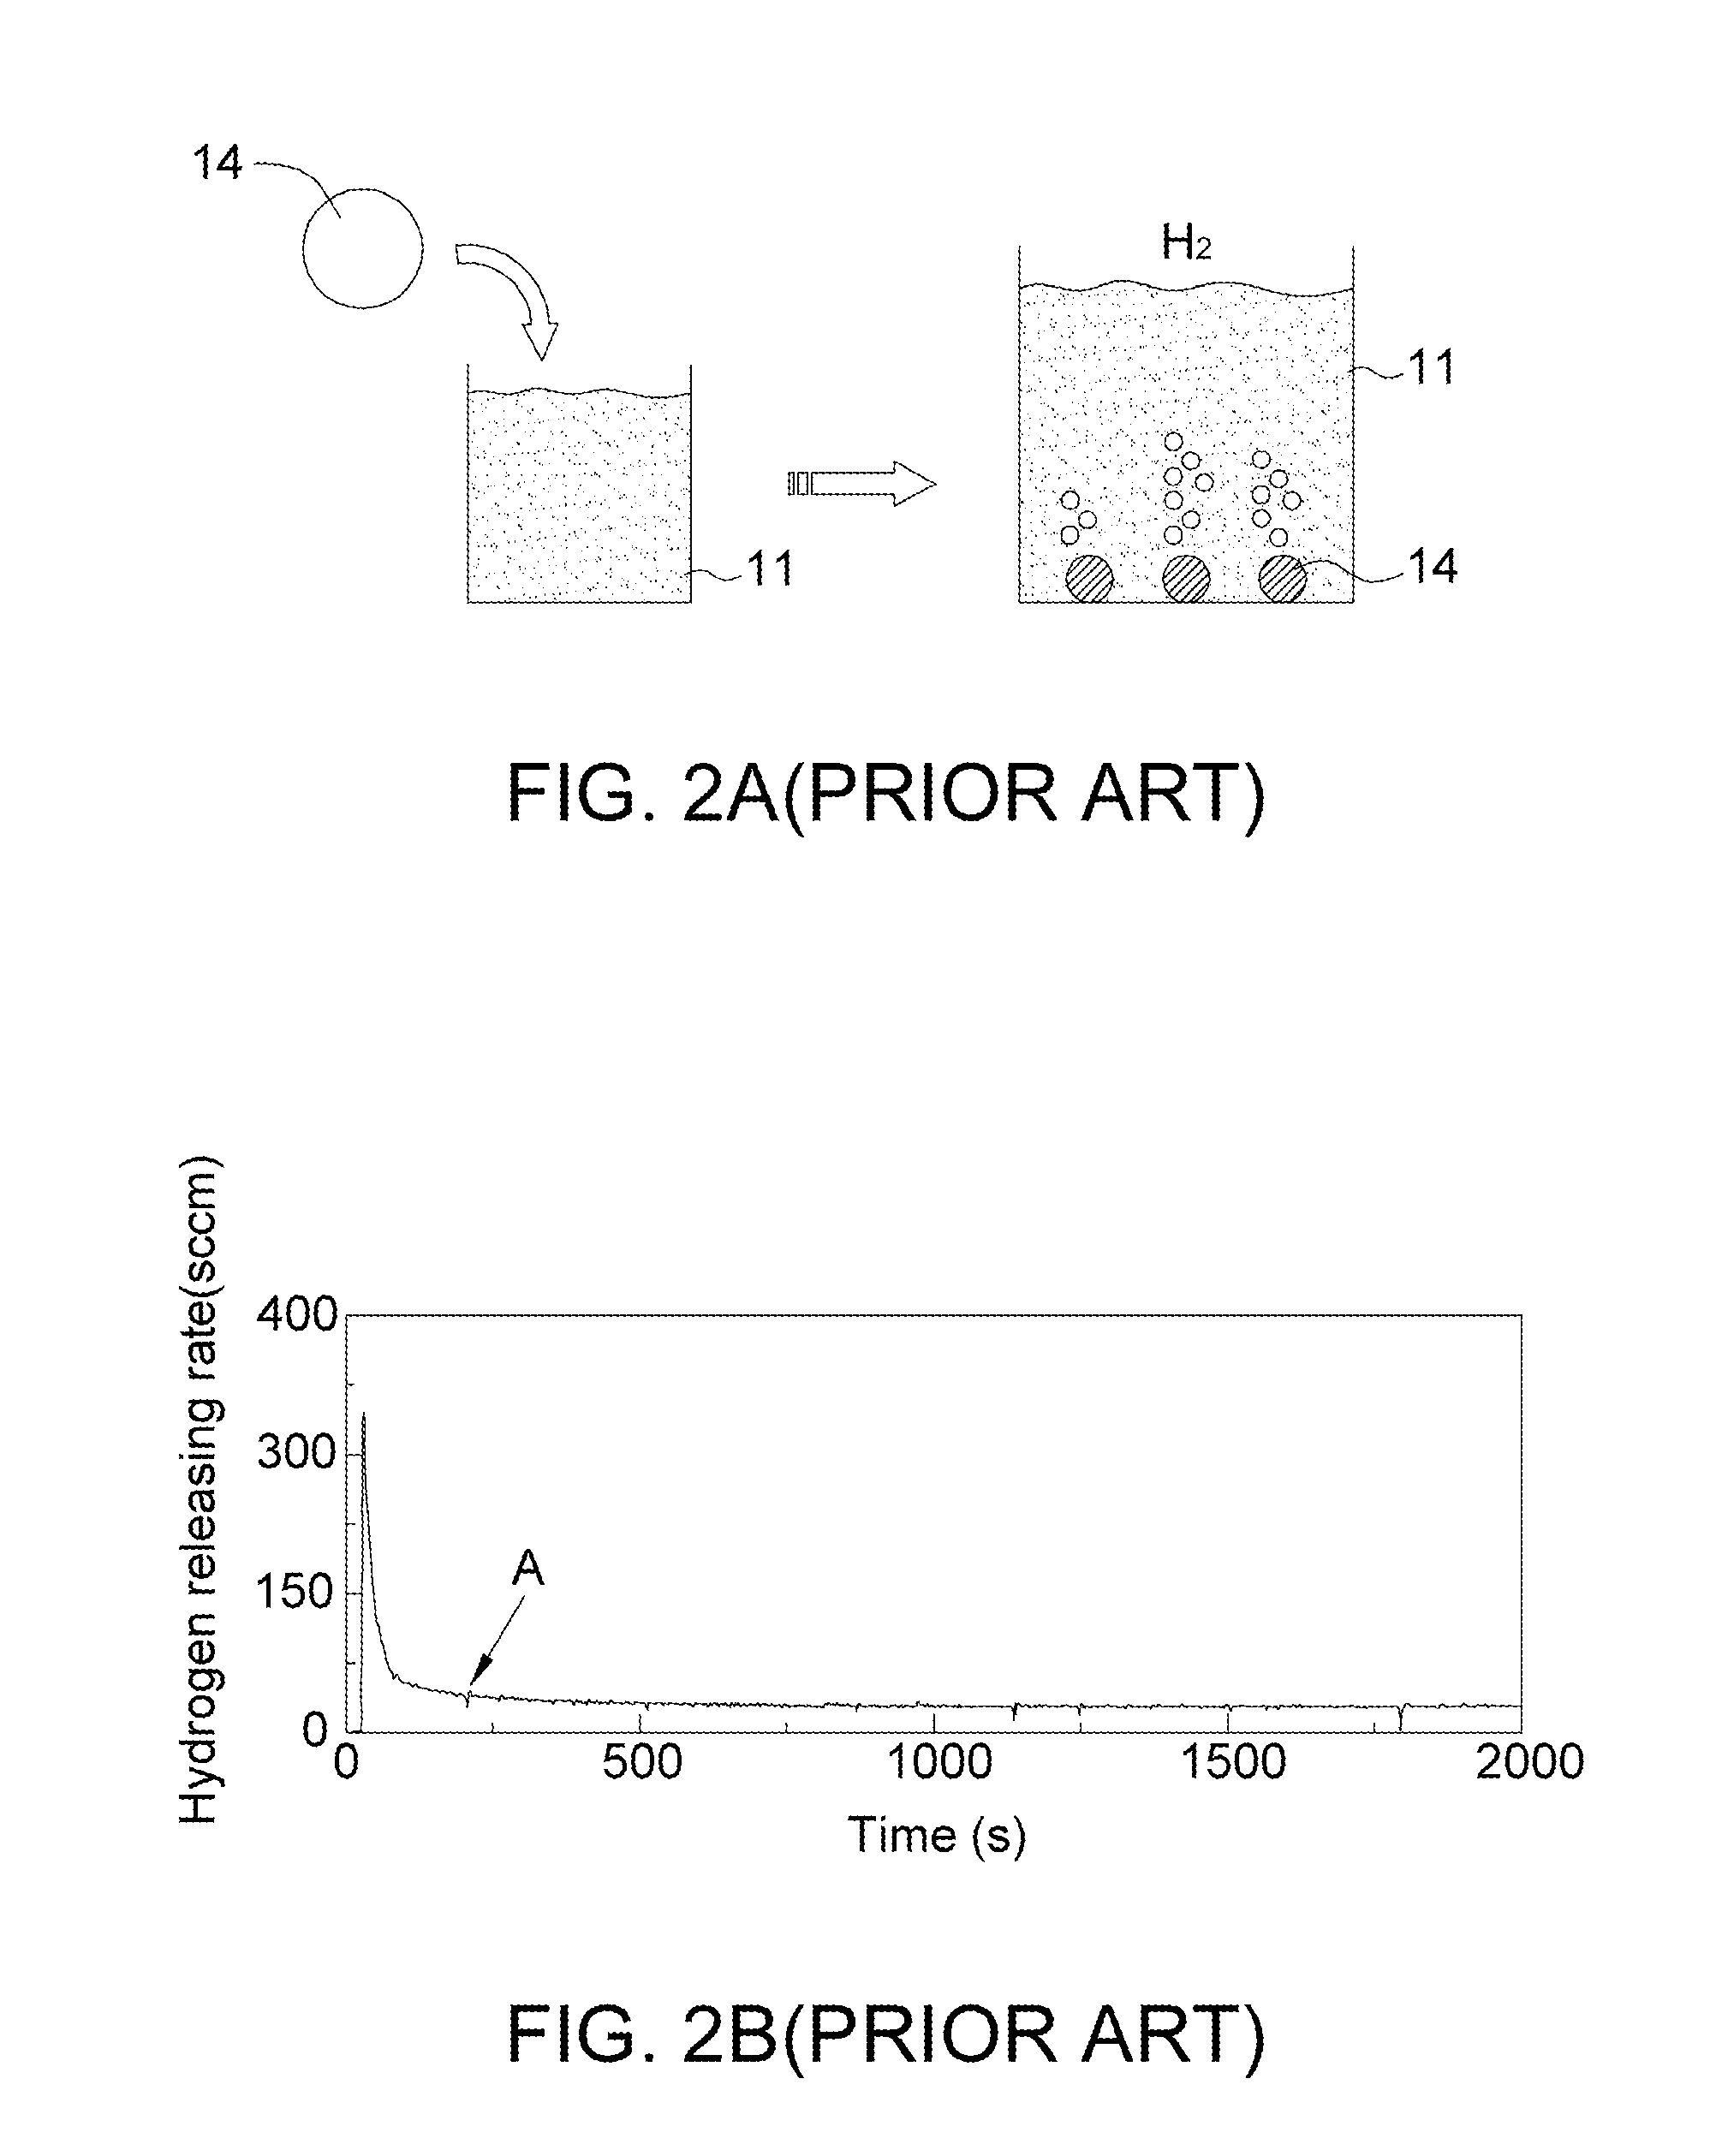 Solid Hydrogen Fuel and Methods of Manufacturing and Using the Same